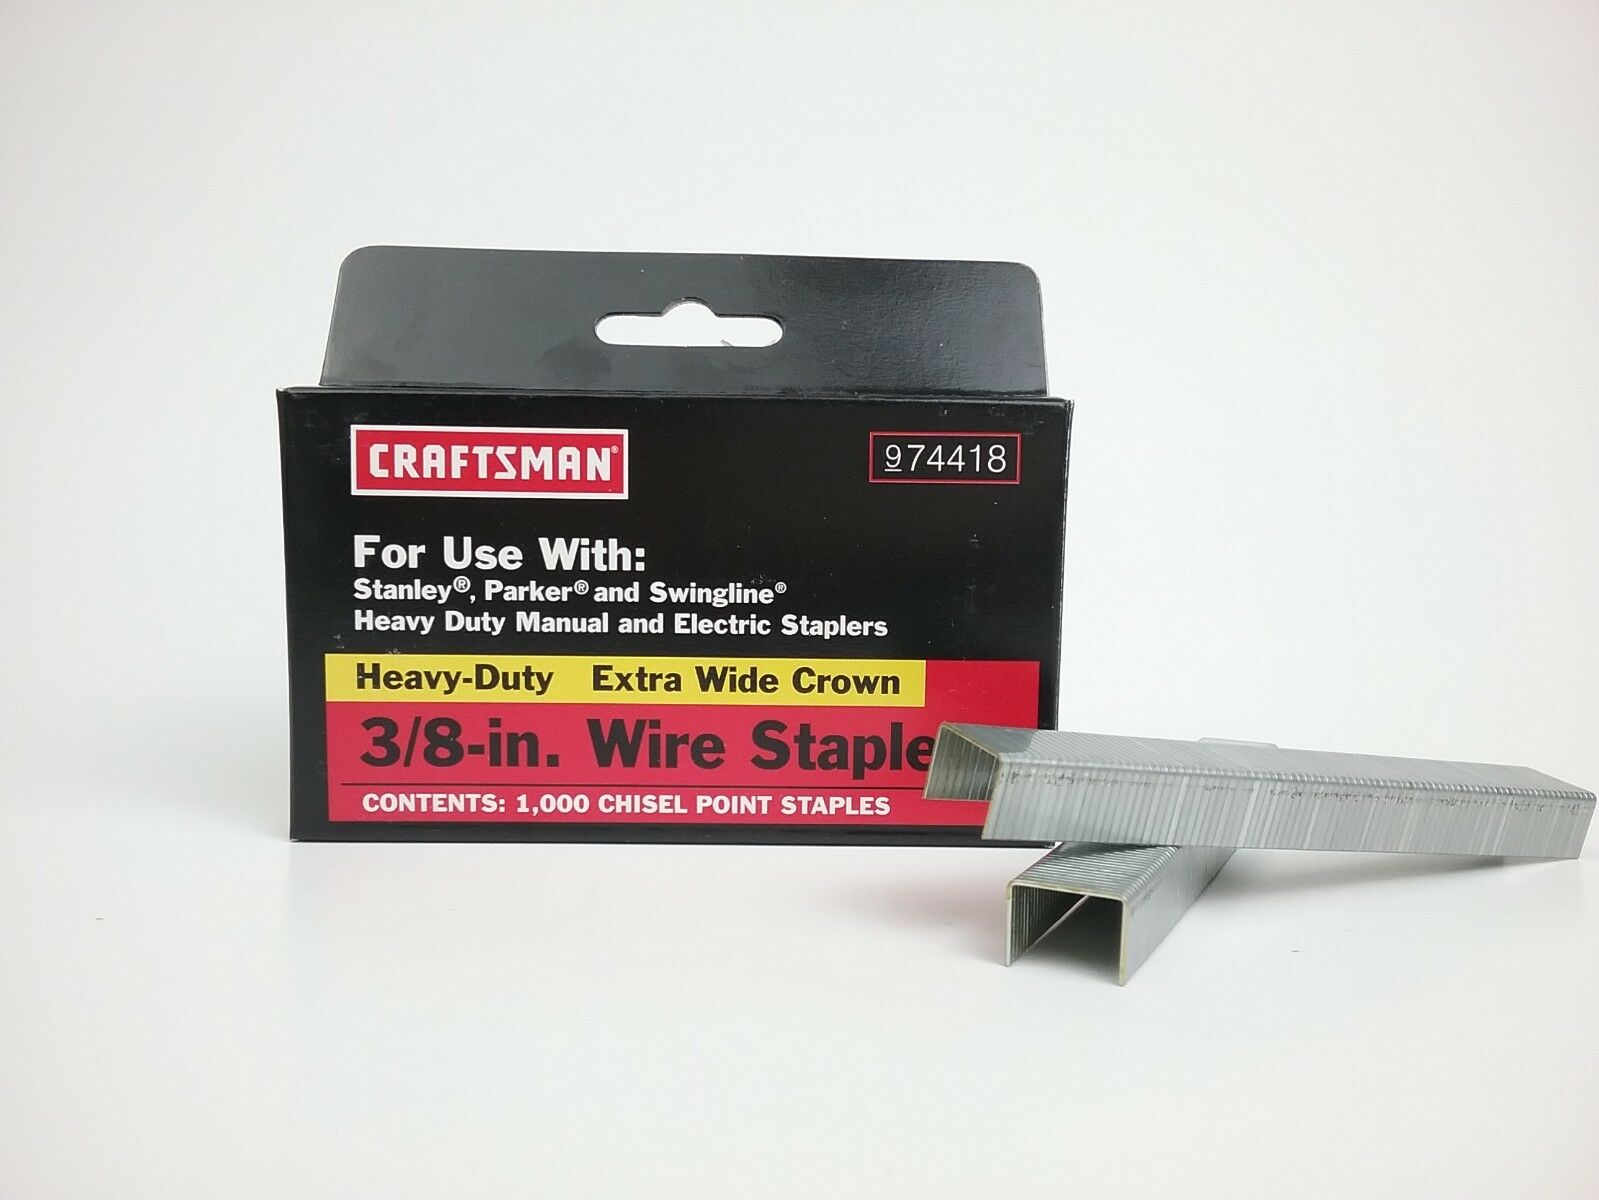 Craftsman Heavy-duty Extra Wide Crown 3/8" Staples 74418